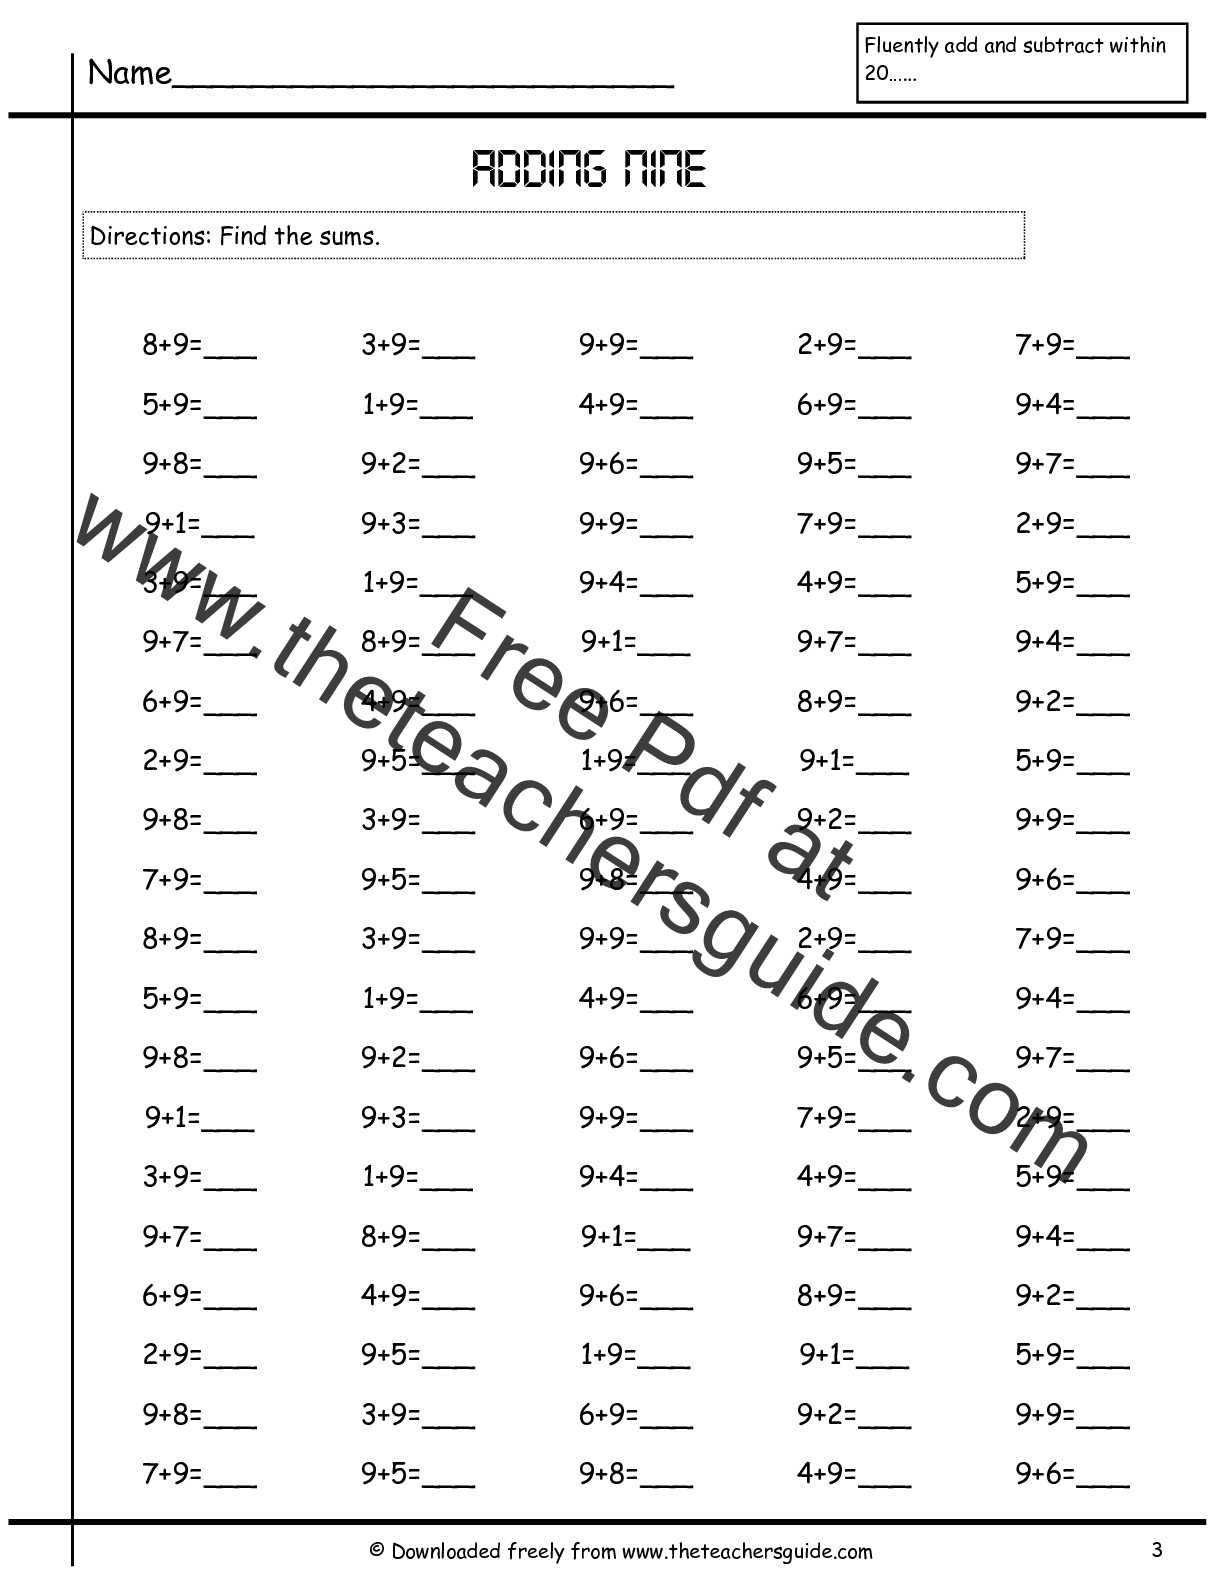 single-digit-addition-worksheets-from-the-teacher-s-guide